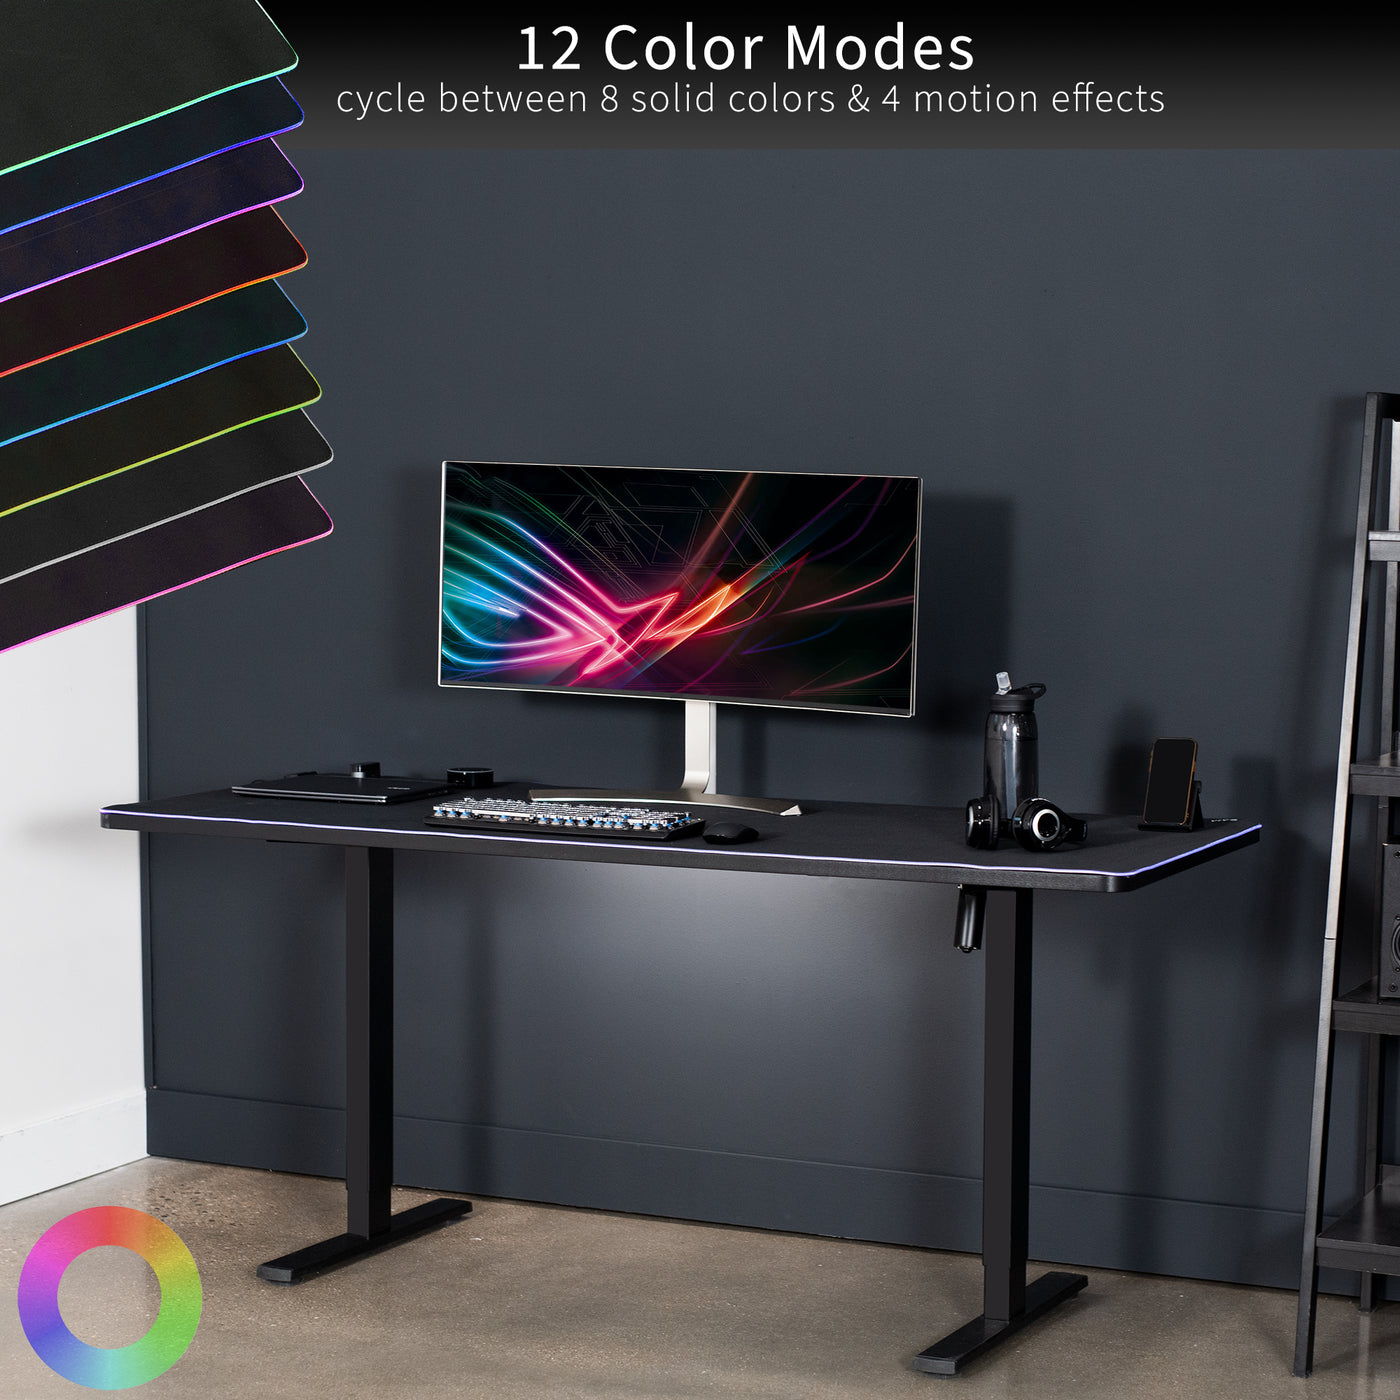 Extra Large 71 x 30 inch Full Size Desk Pad with RGB Lighting for Office Ambience and Immersive Gaming, Oversized Mouse Pad Table Top Cover, 12 Color Modes, Non-slip Base